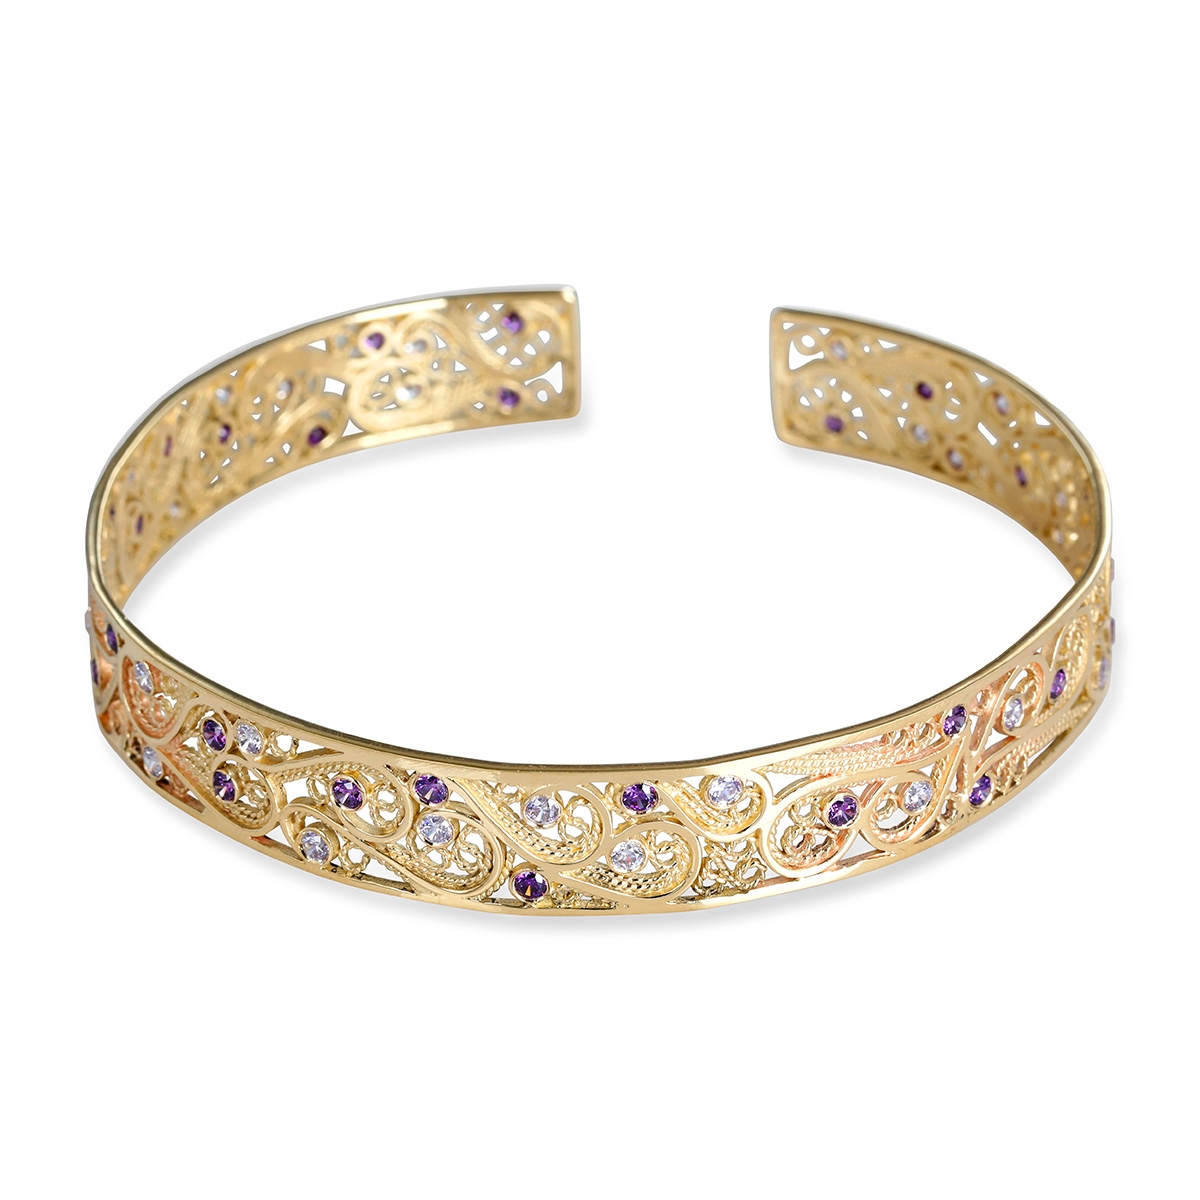 Rafael Jewelry Handcrafted 14K Yellow Gold Filigree Bracelet With Amethyst and Lavender Stones - 1